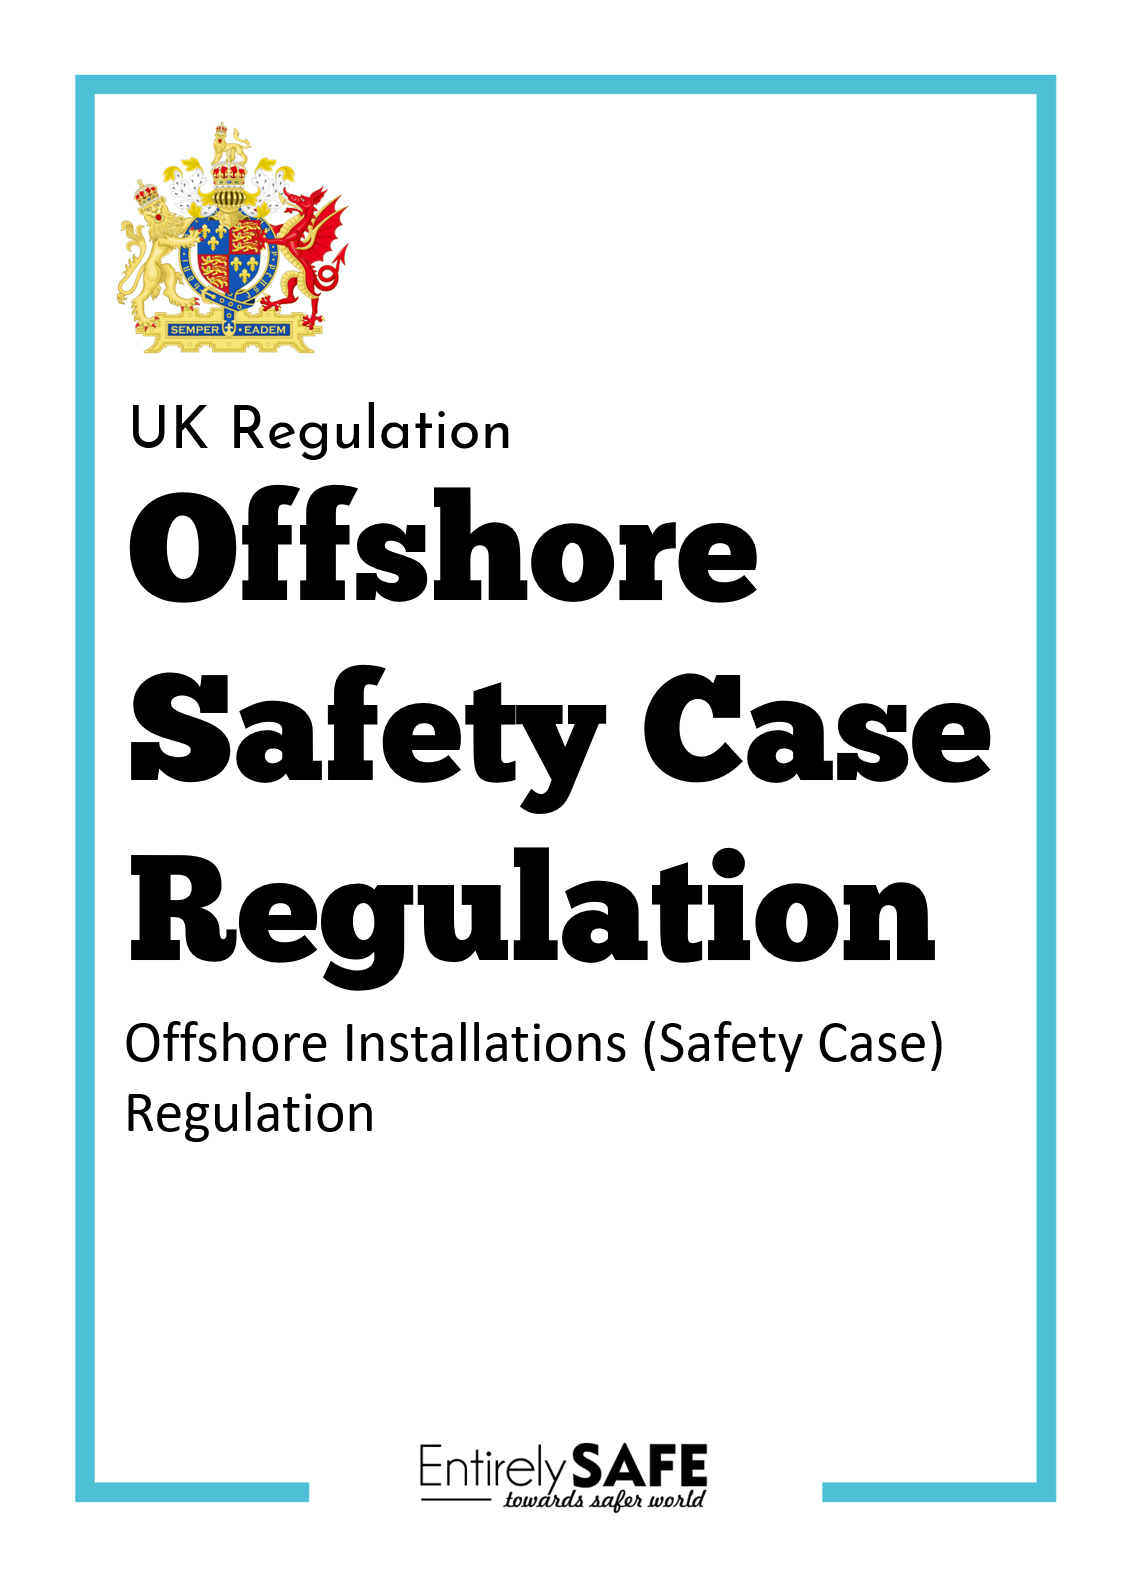 164-Offshore Installations (Safety Case) Regulations